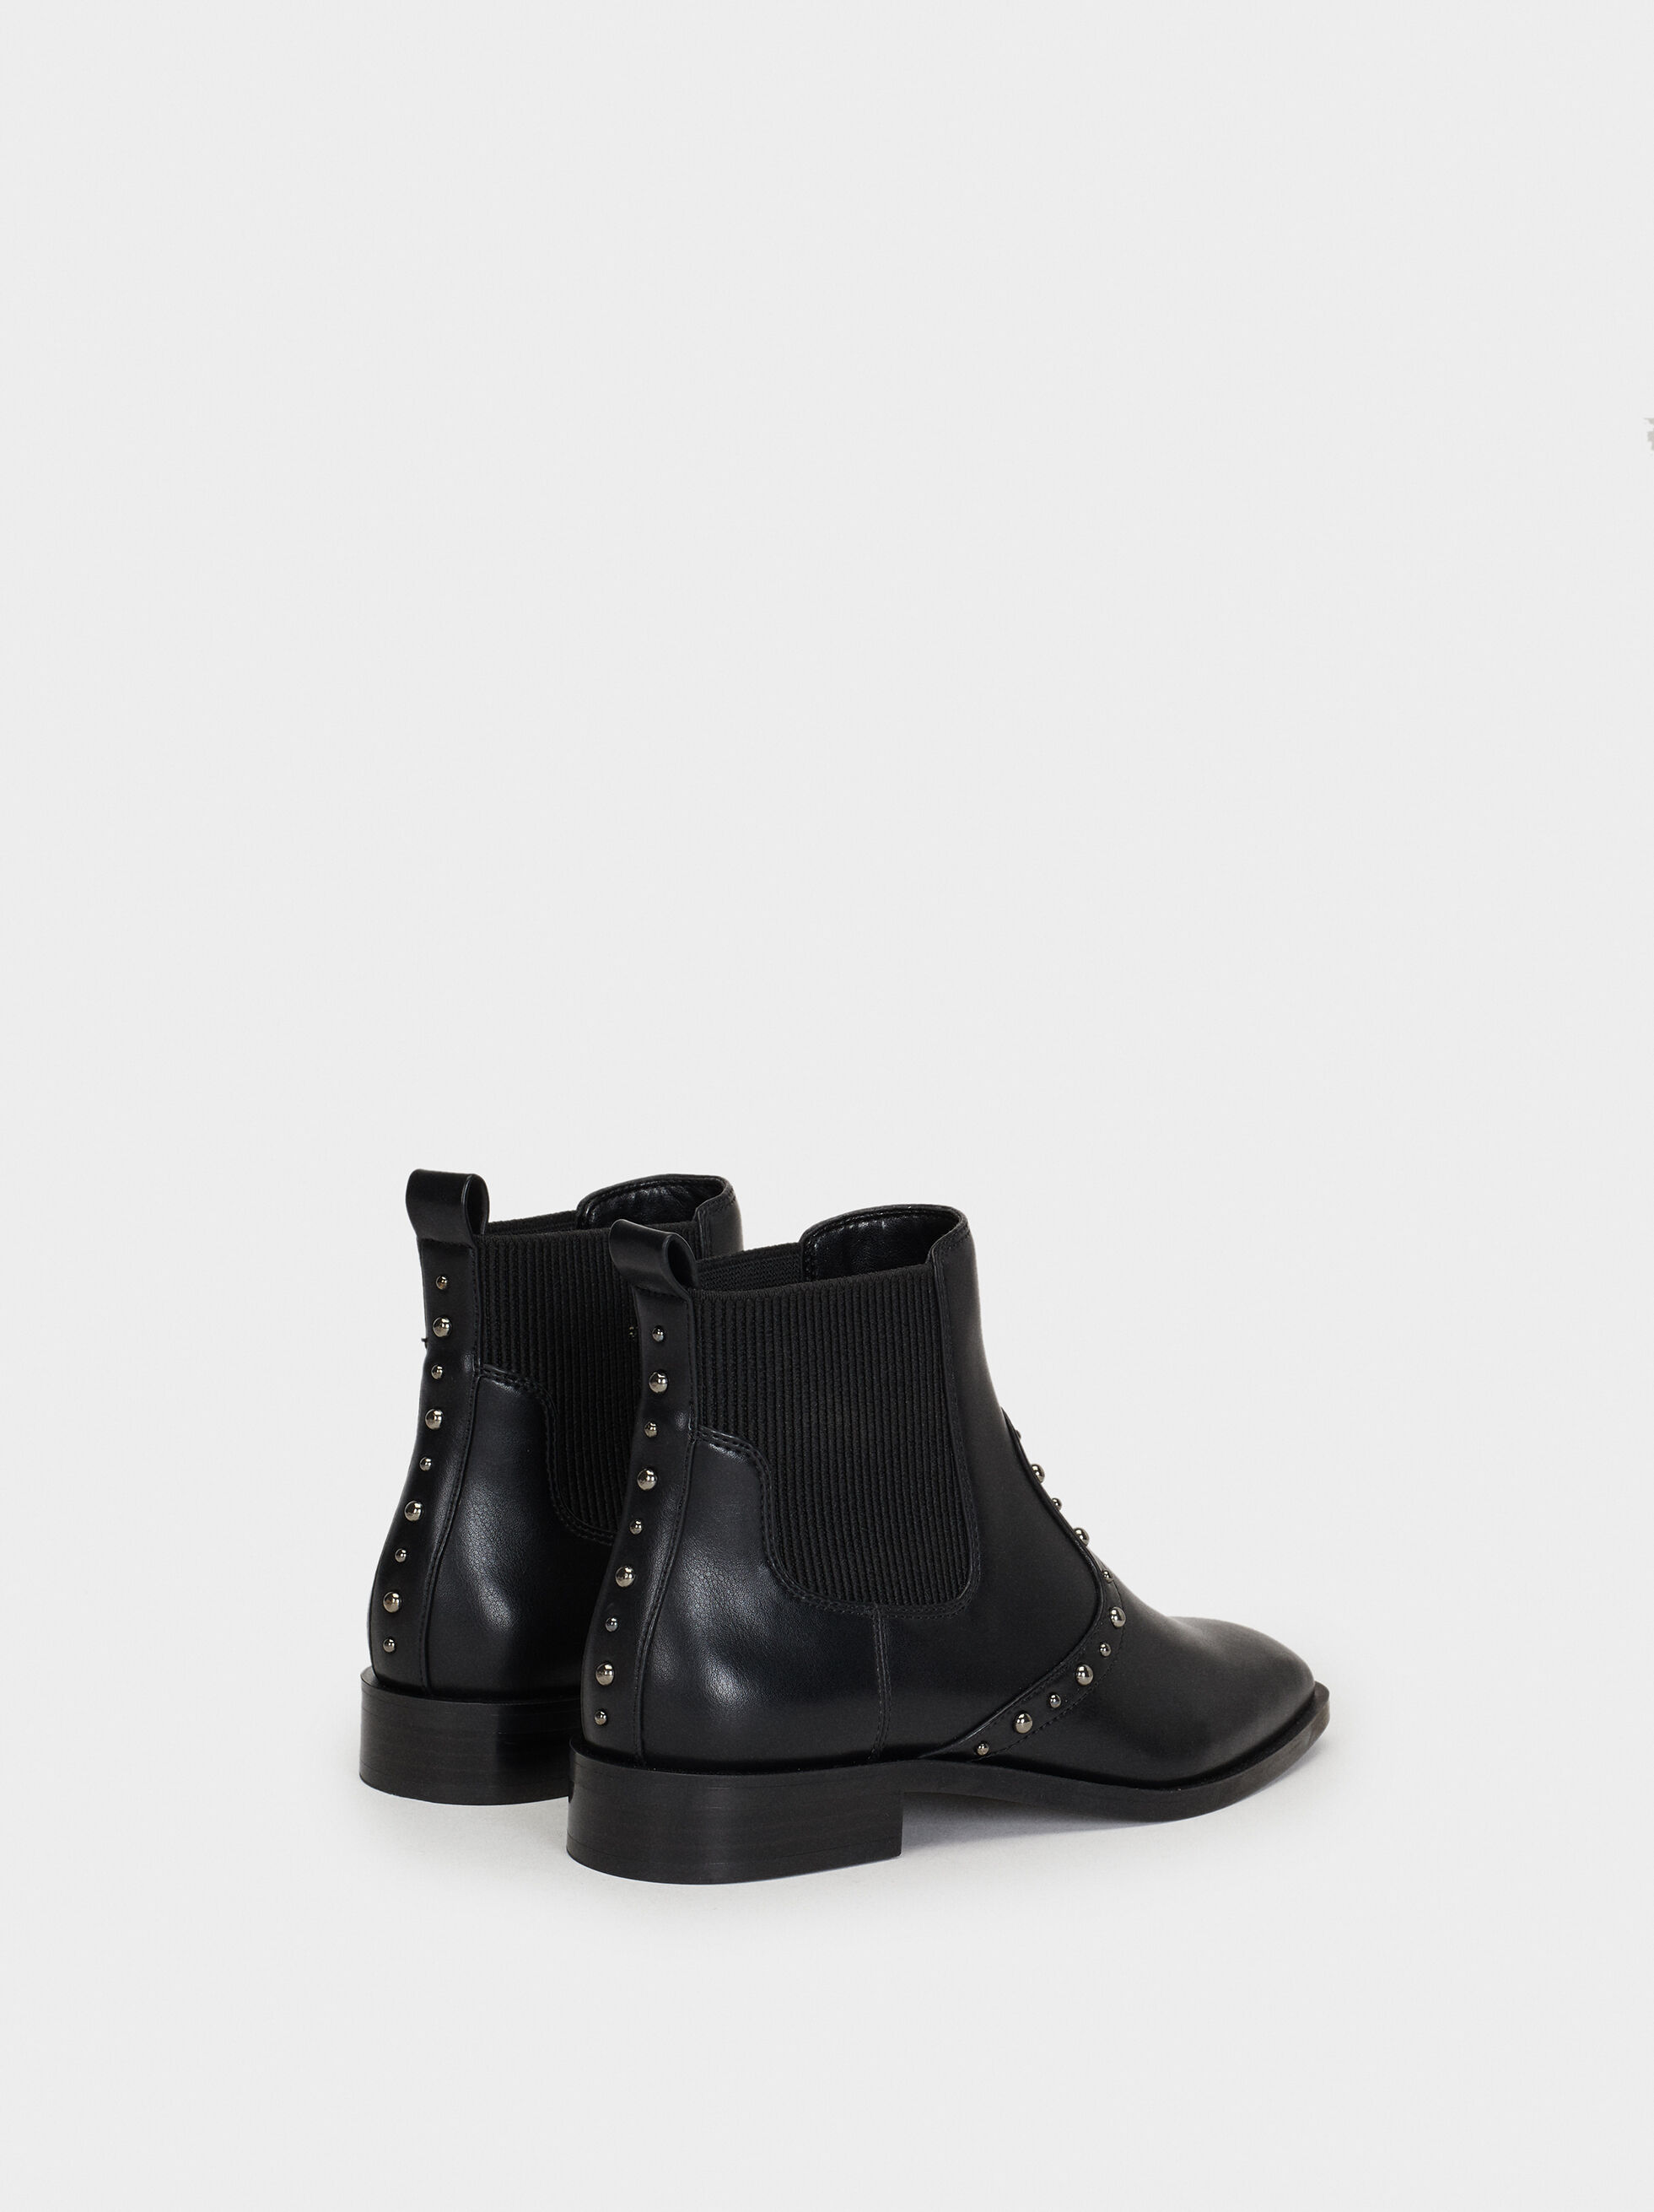 Studded Ankle Boots - Black - Woman 